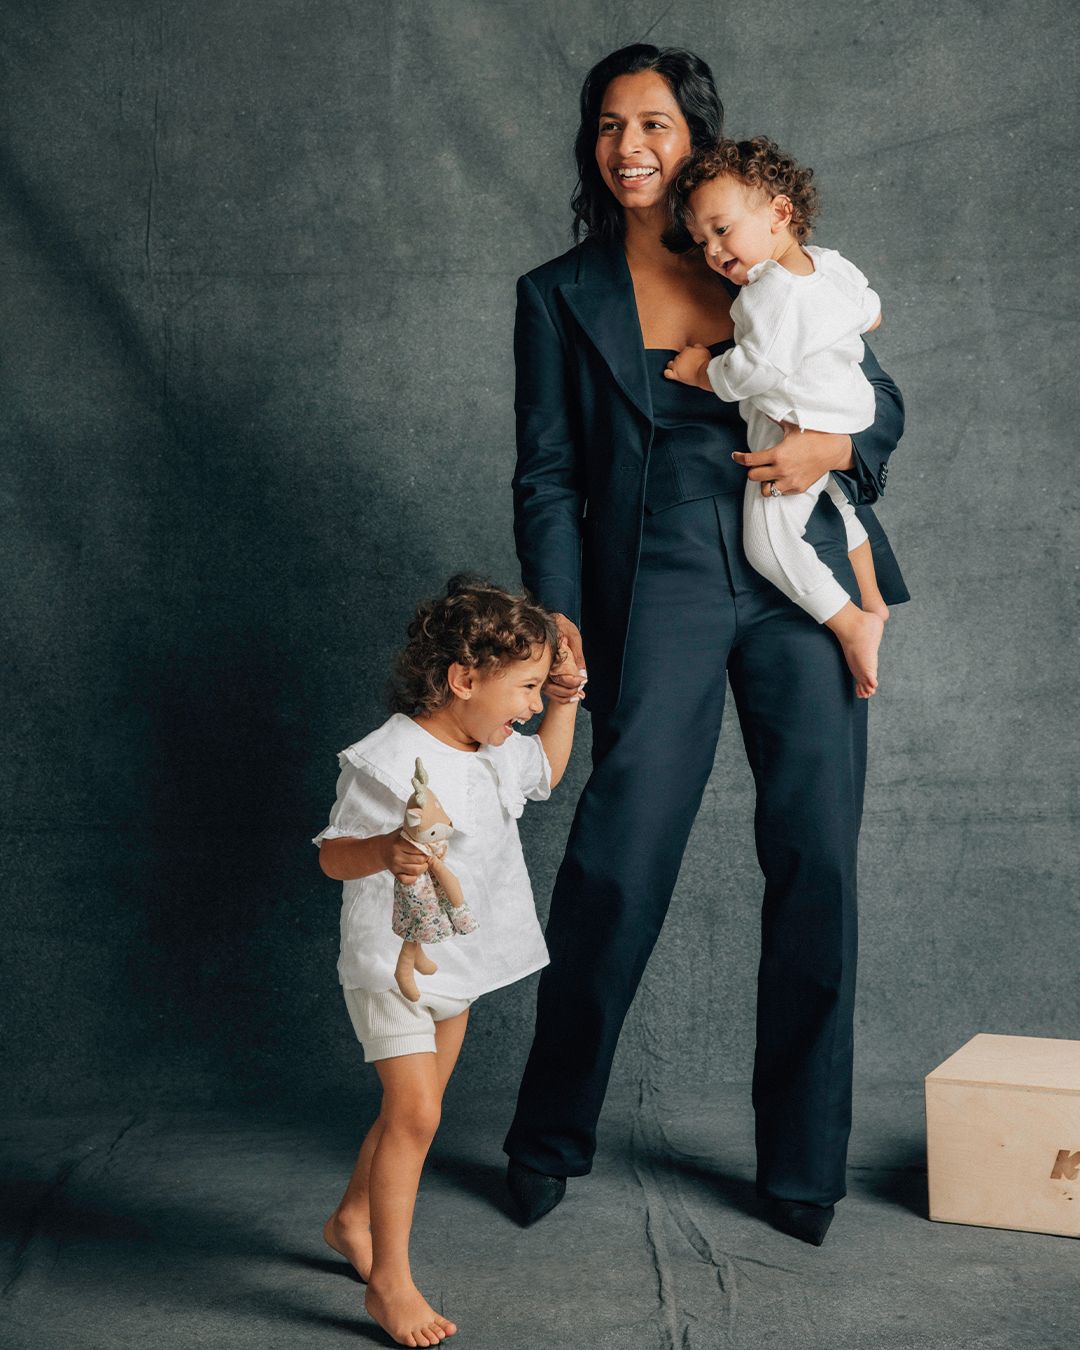 Shamini Rajarethnam smiling wearing a black pant suit holding her son and holding hands with her daughter